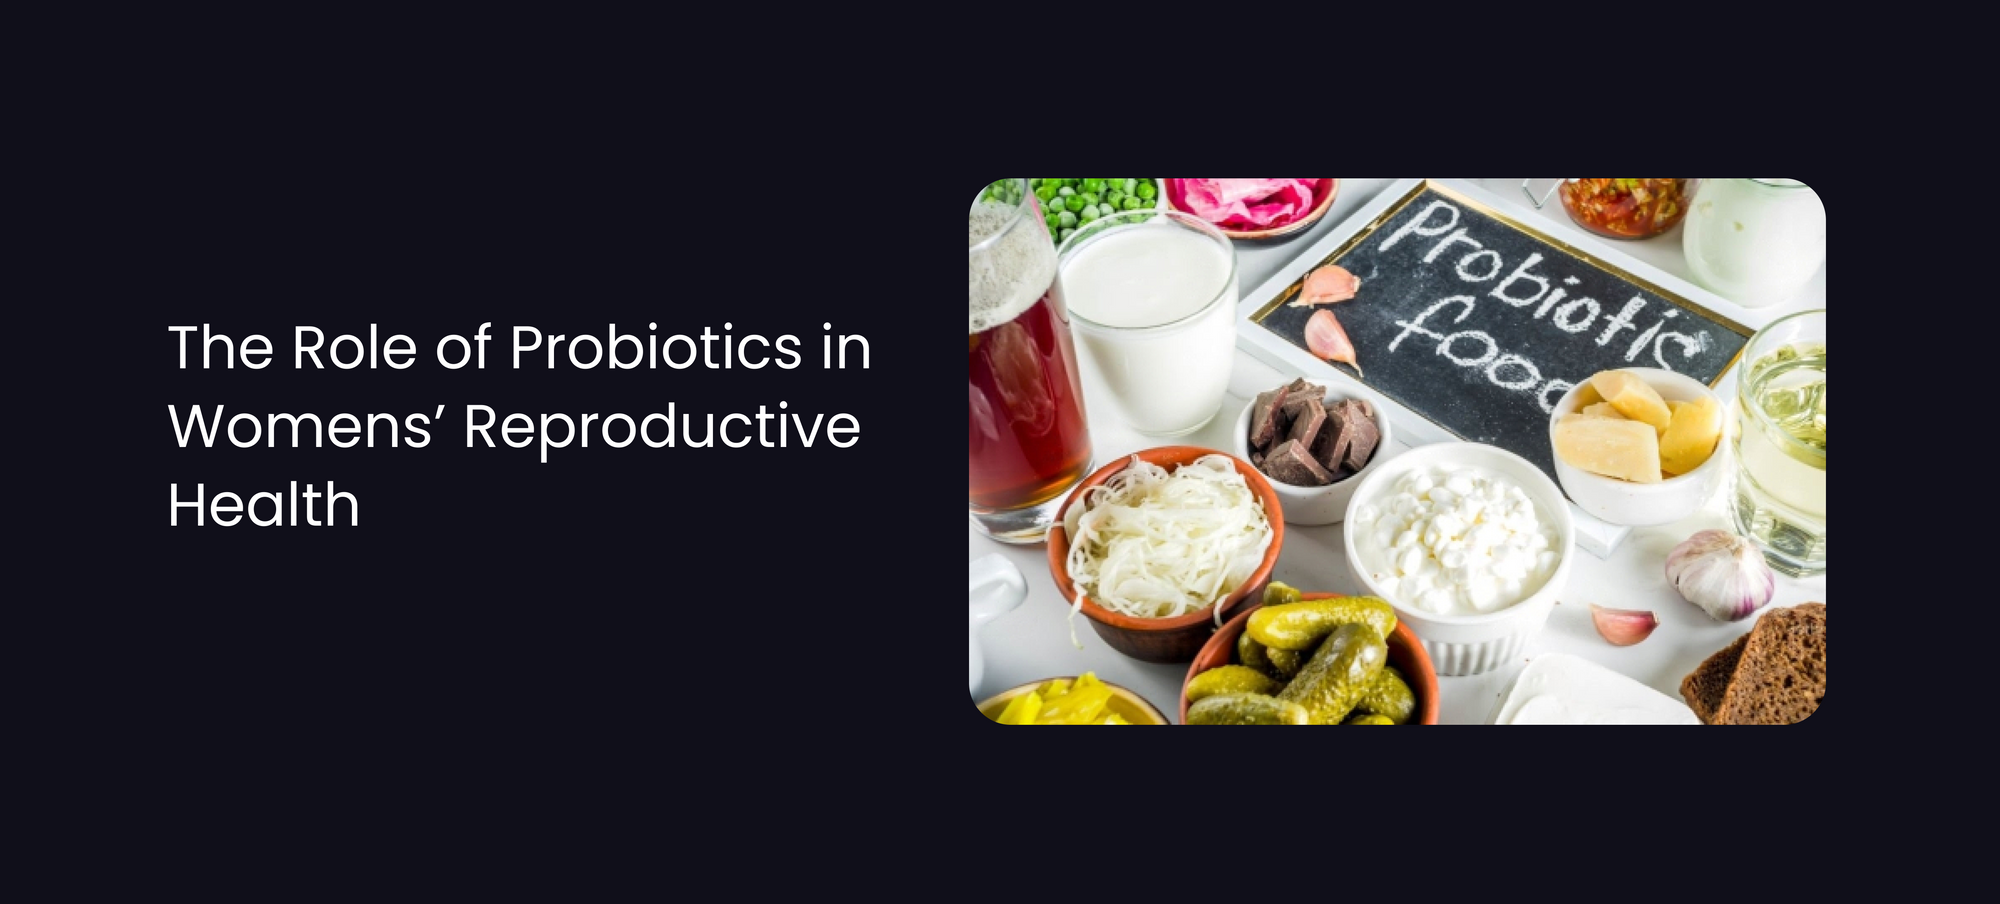 The Role of Probiotics in Women's Reproductive Health